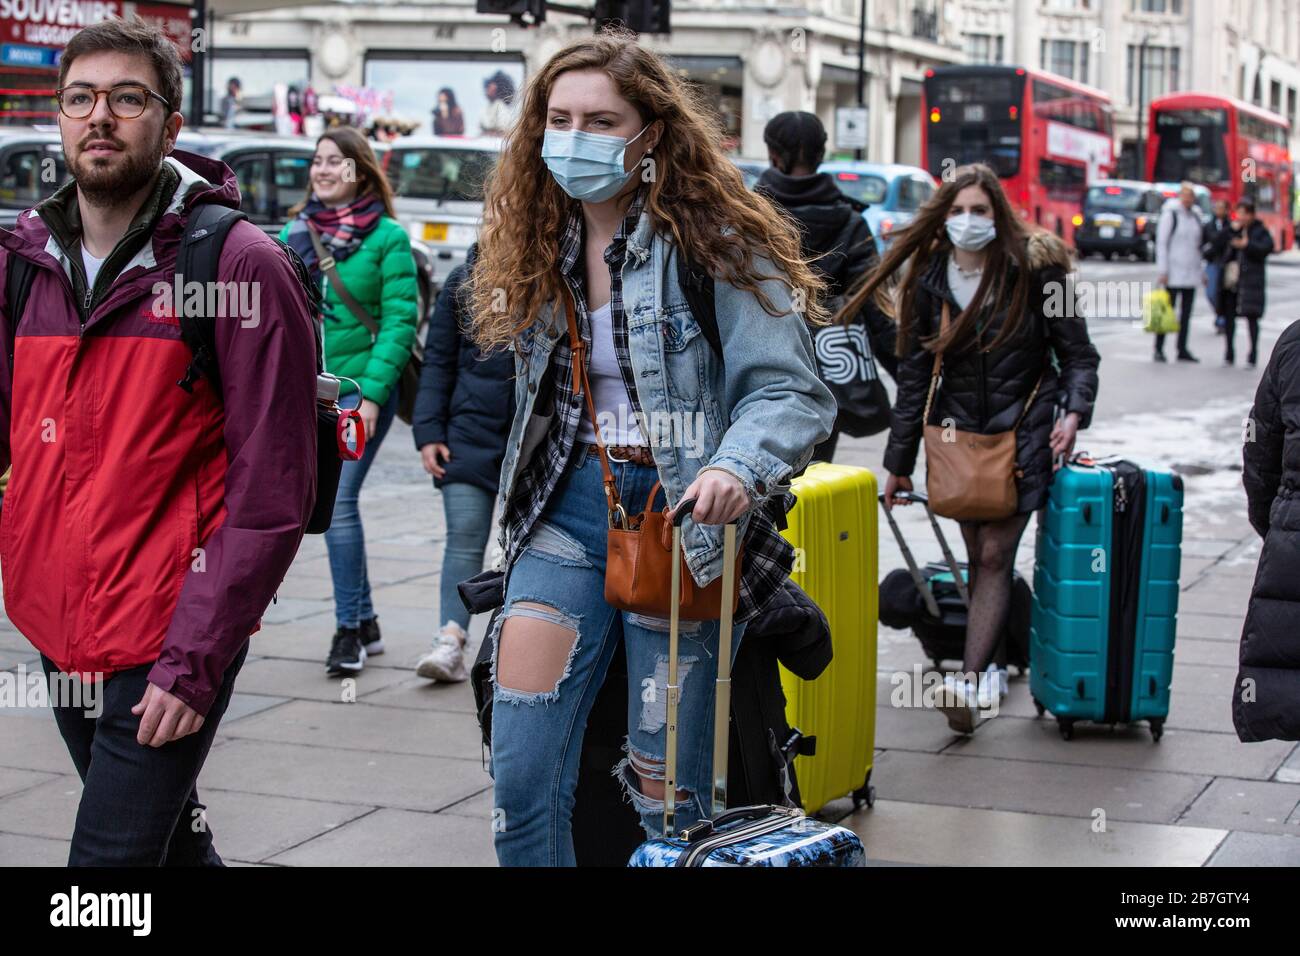 Travellers take precautions by wearing face masks in the West End of London against infection of the Coronavirus Covid19 pandemic, England, UK Stock Photo